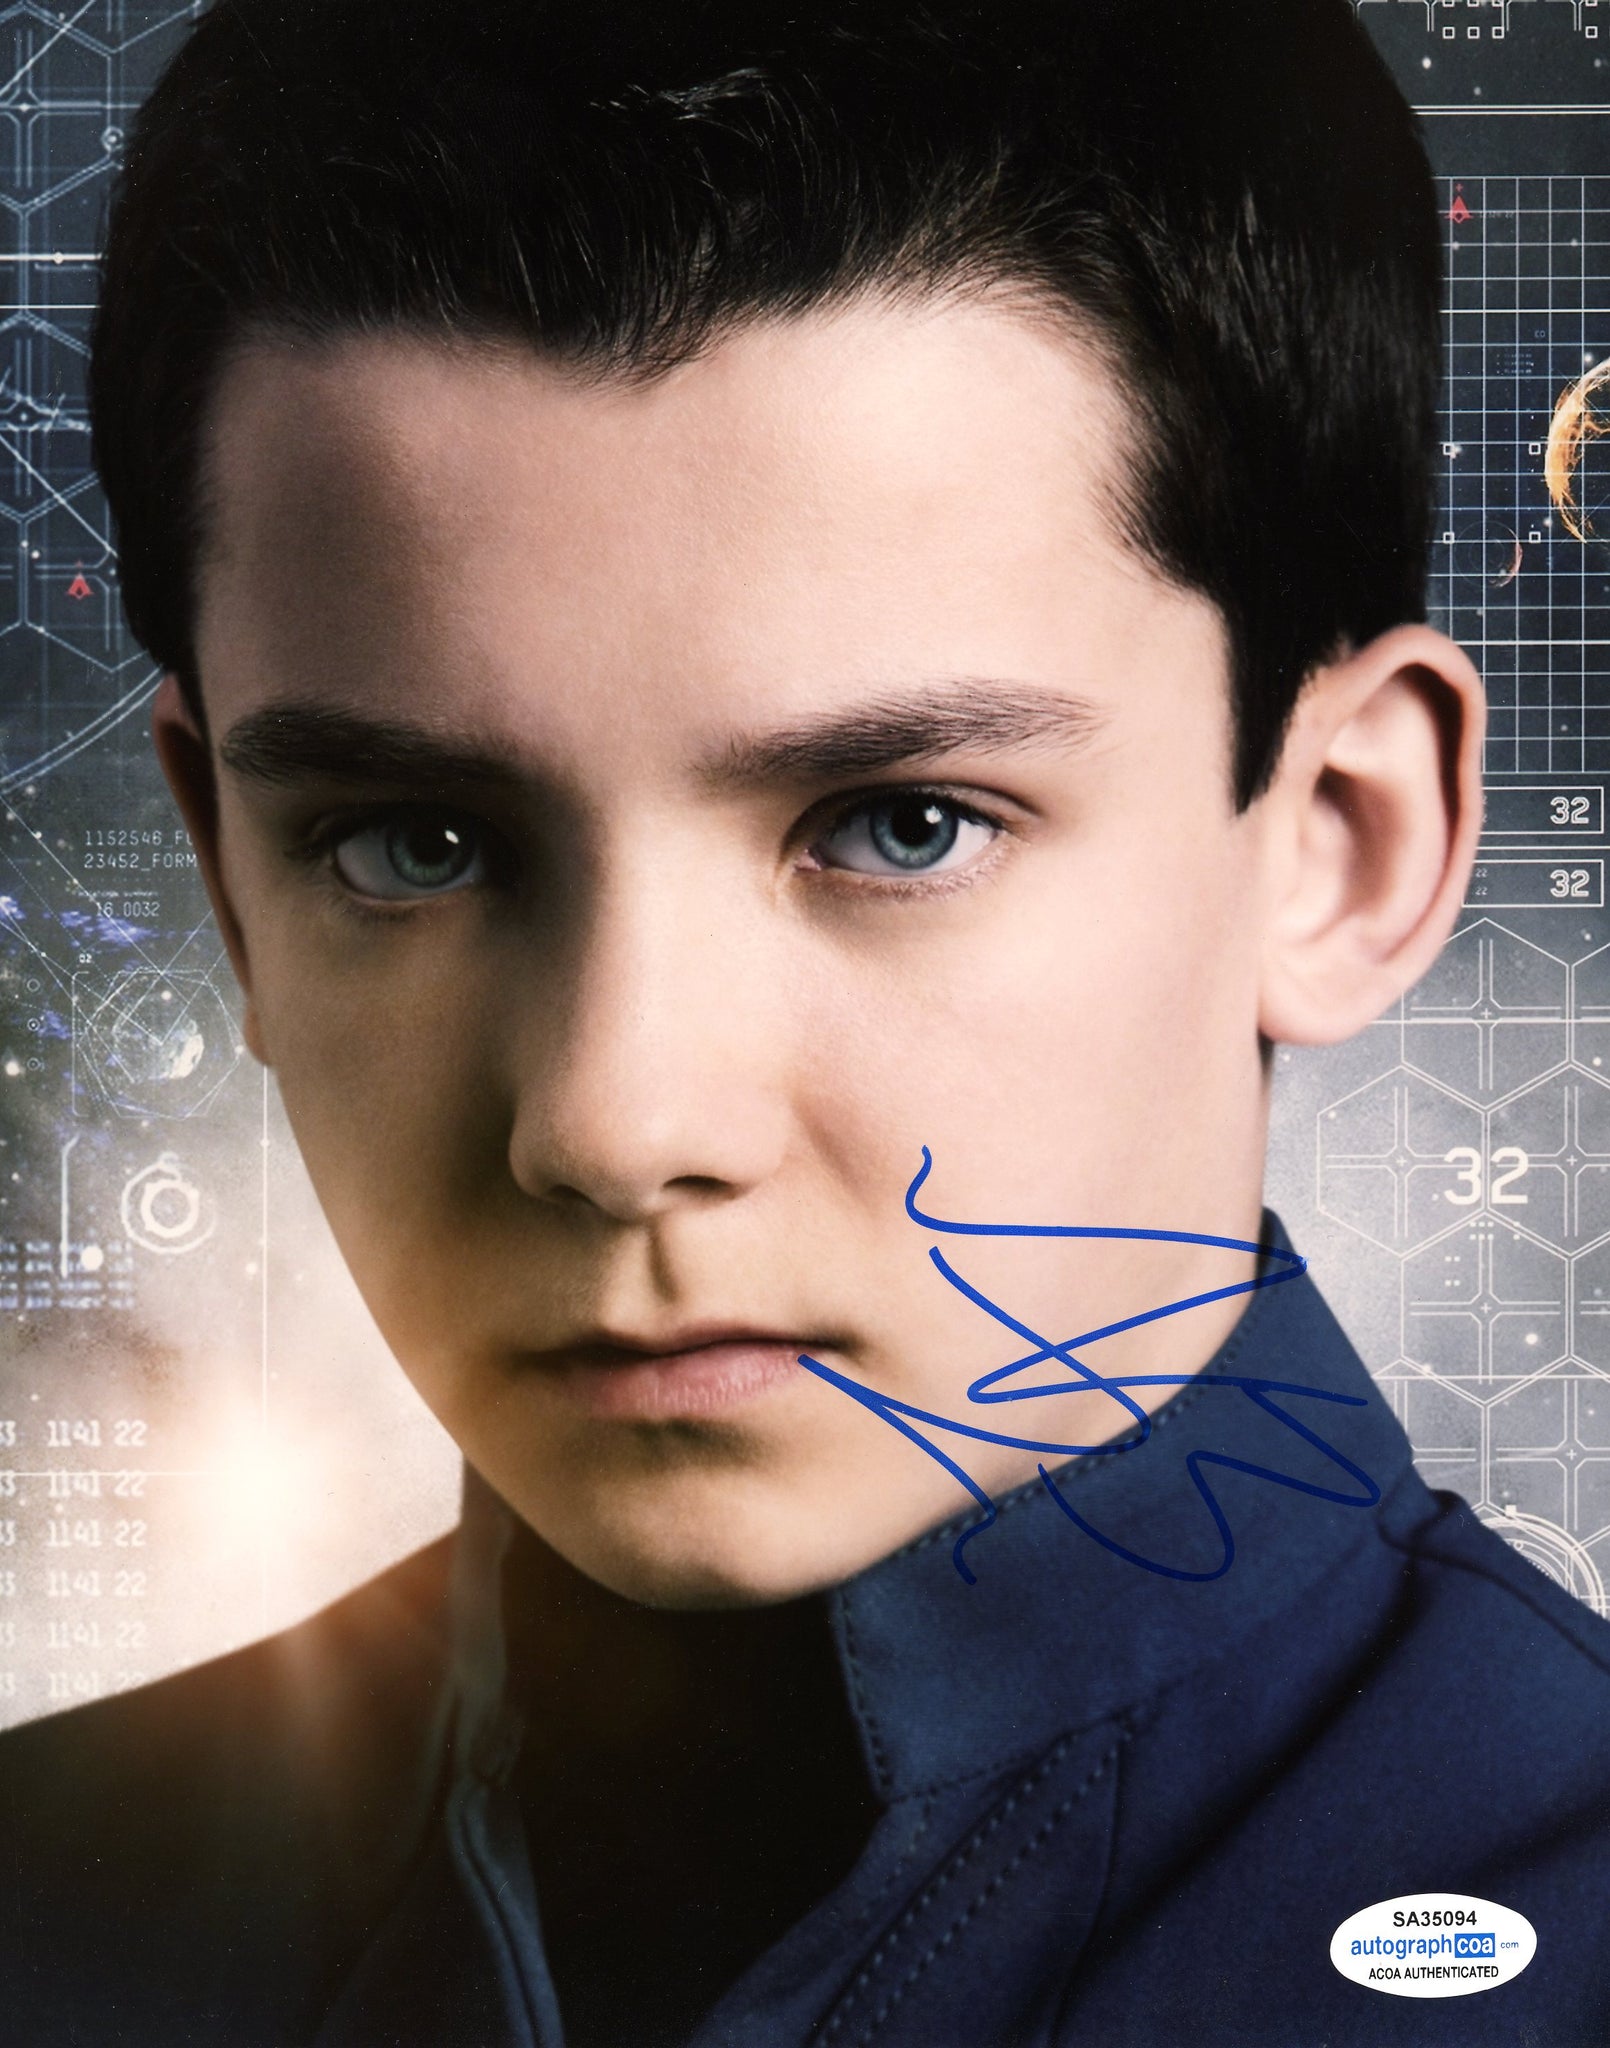 Asa Butterfield Ender's Game Signed Autograph 8x10 Photo ACOA - Outlaw Hobbies Authentic Autographs